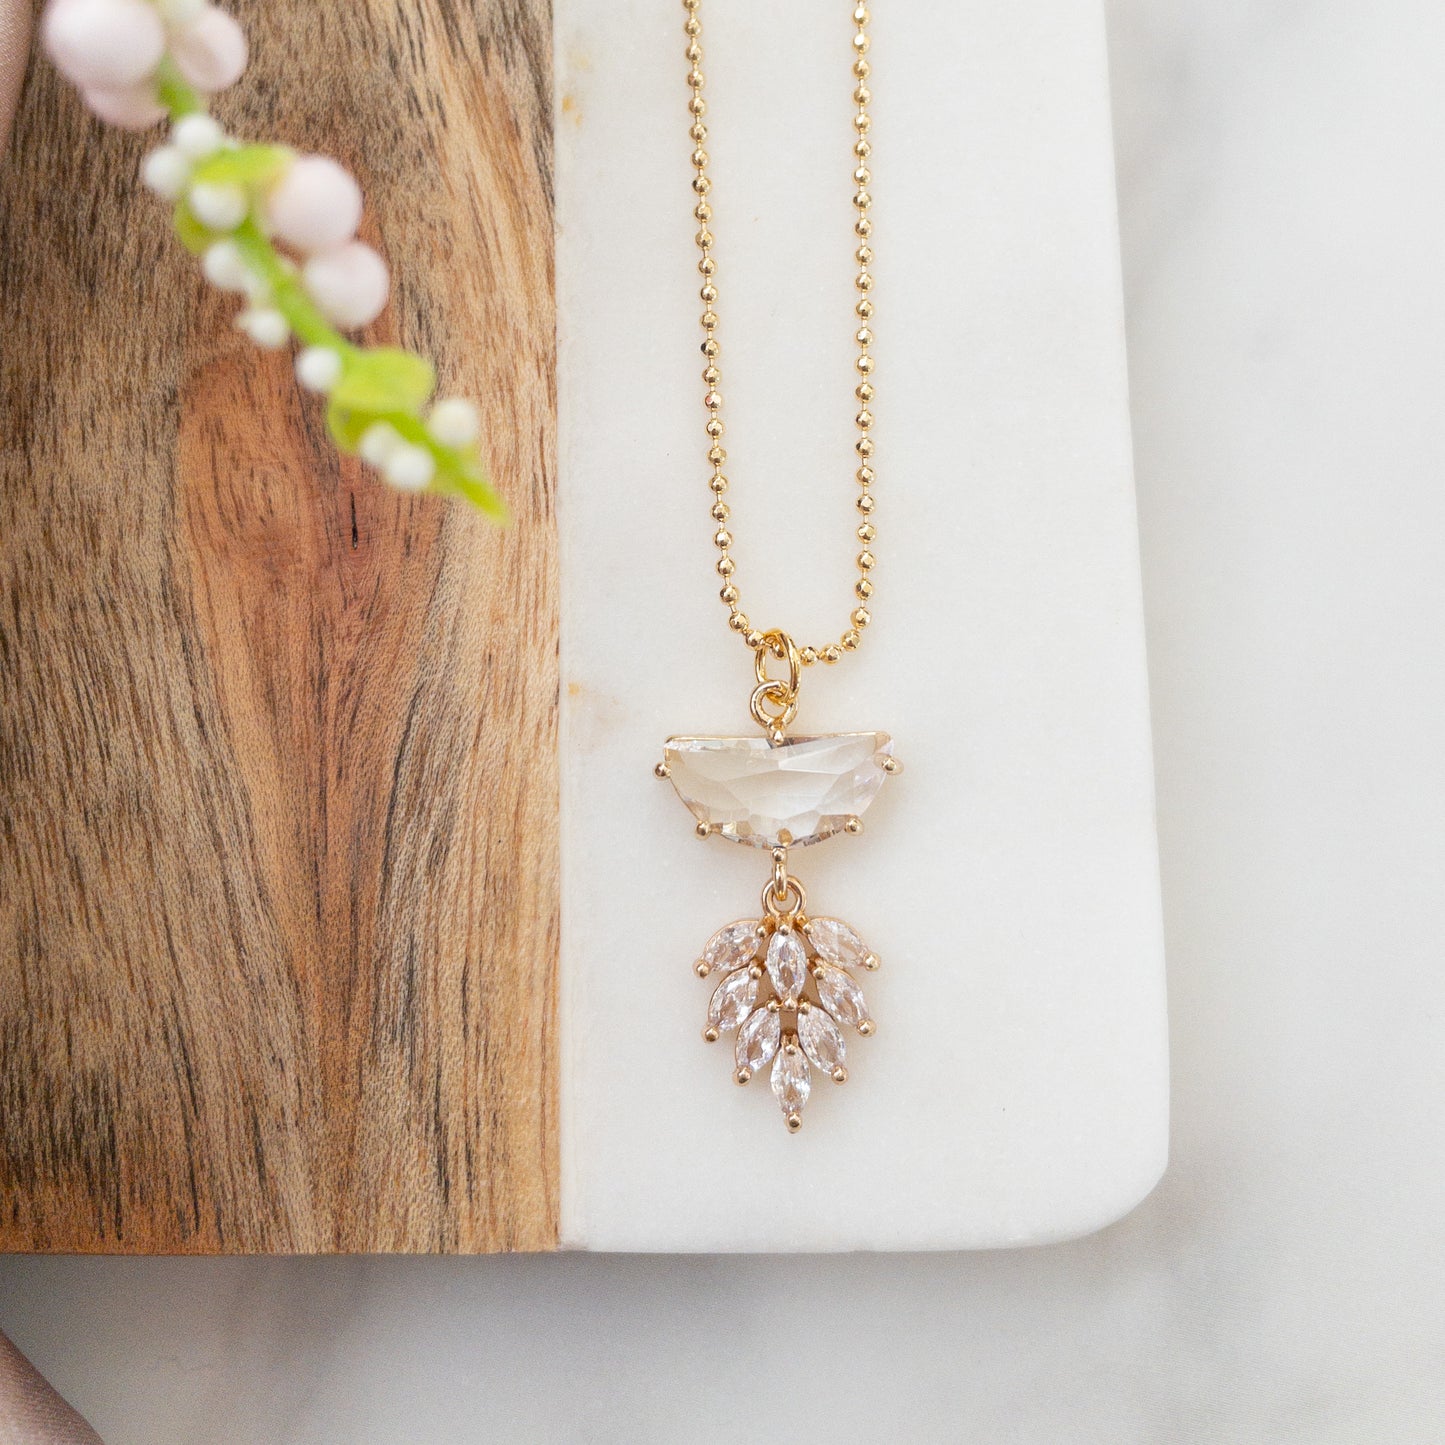 The Aspen Necklace - Gold